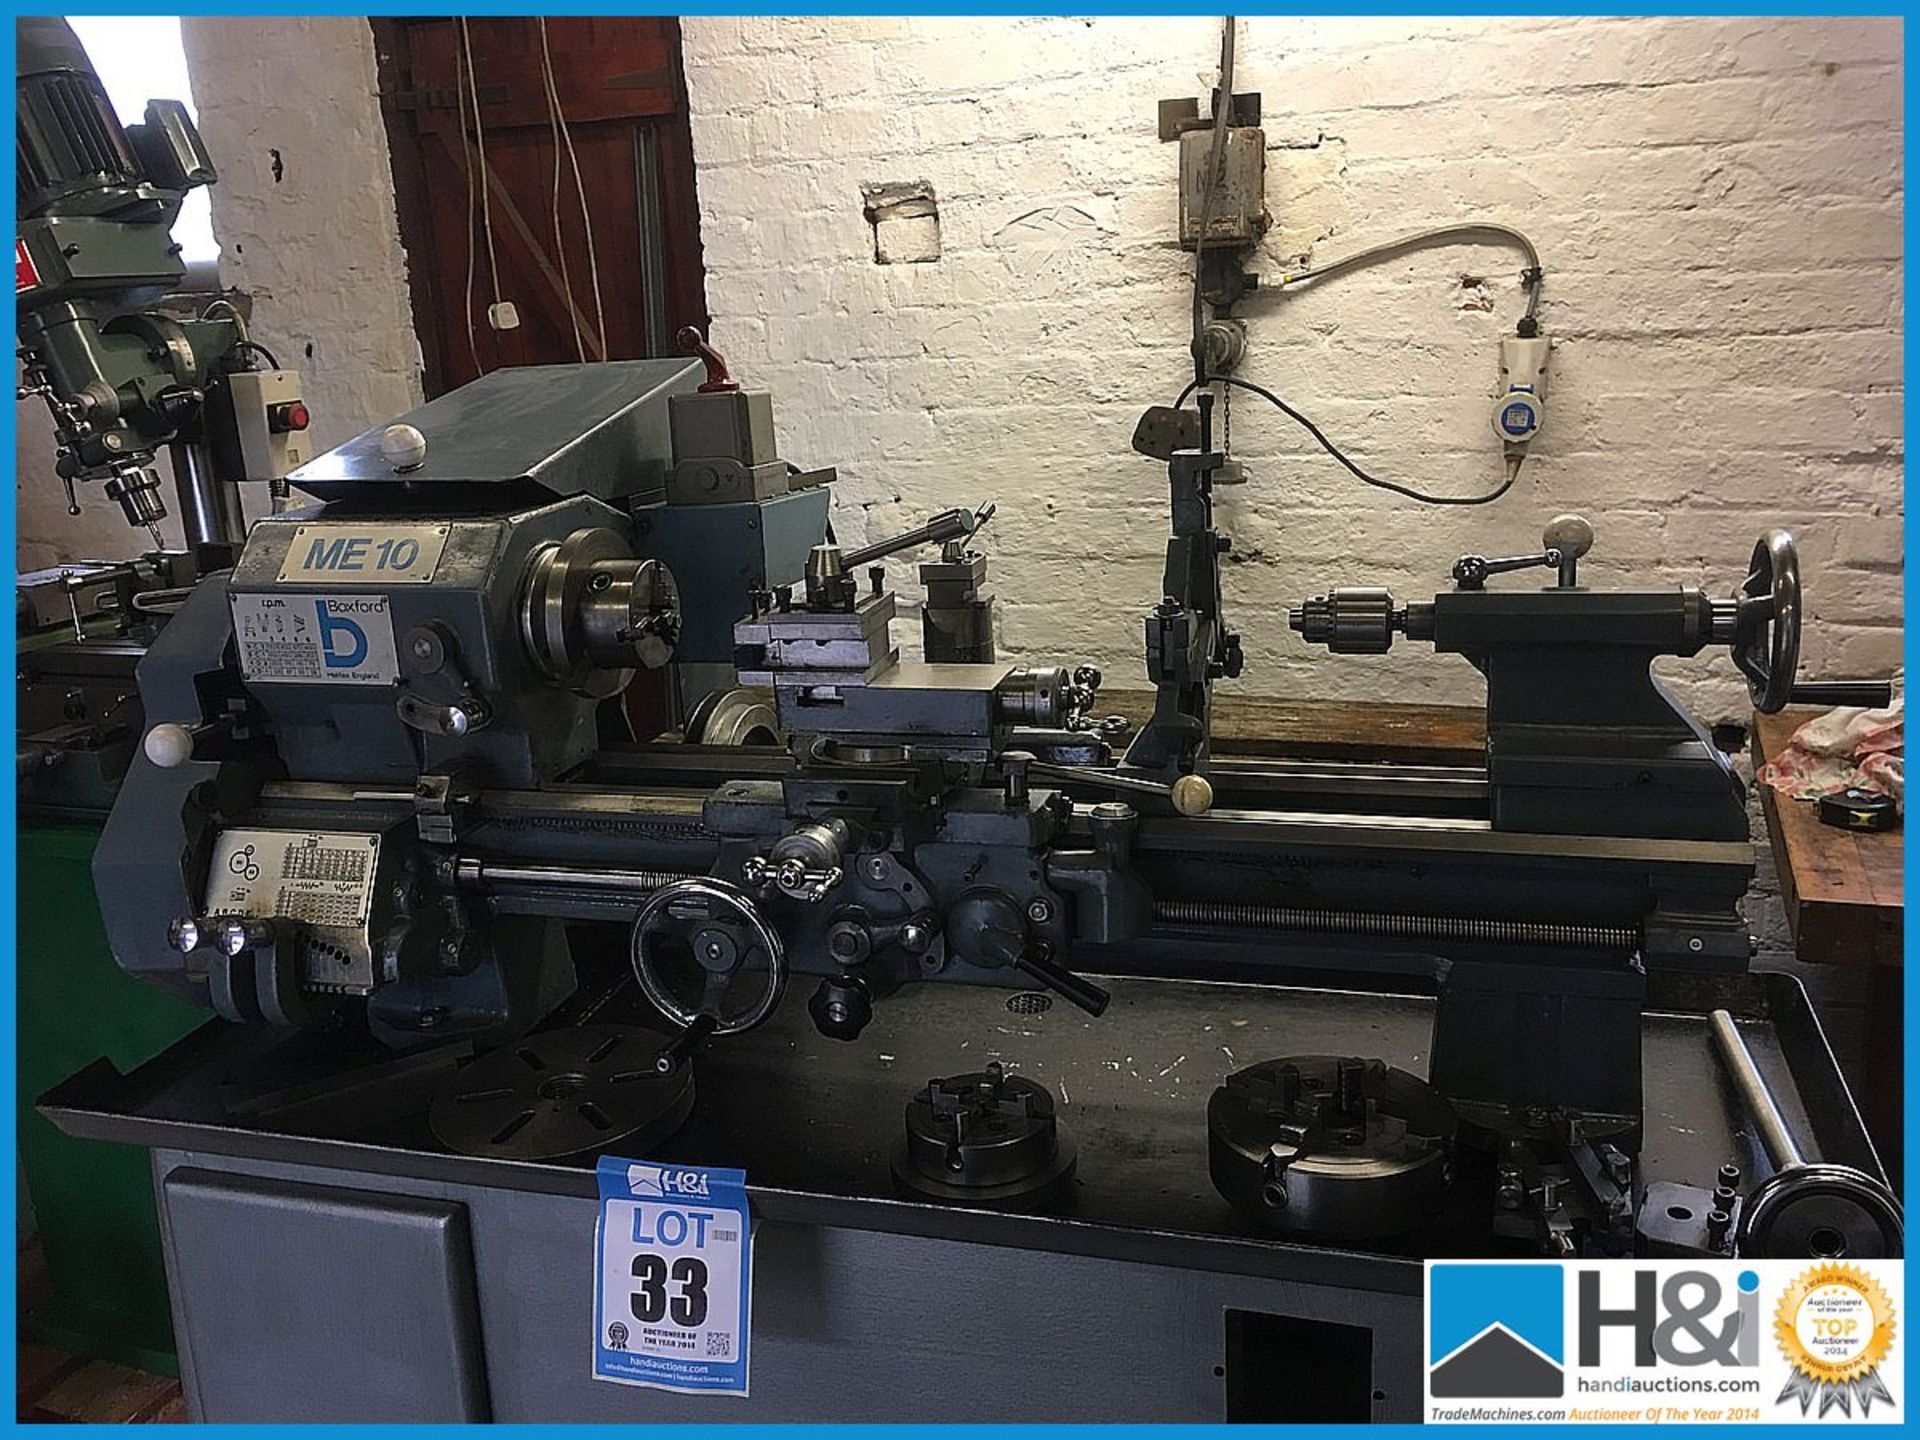 Boxford ME10 single phase engineers lathe with good quantity of chucks and accessories lovely